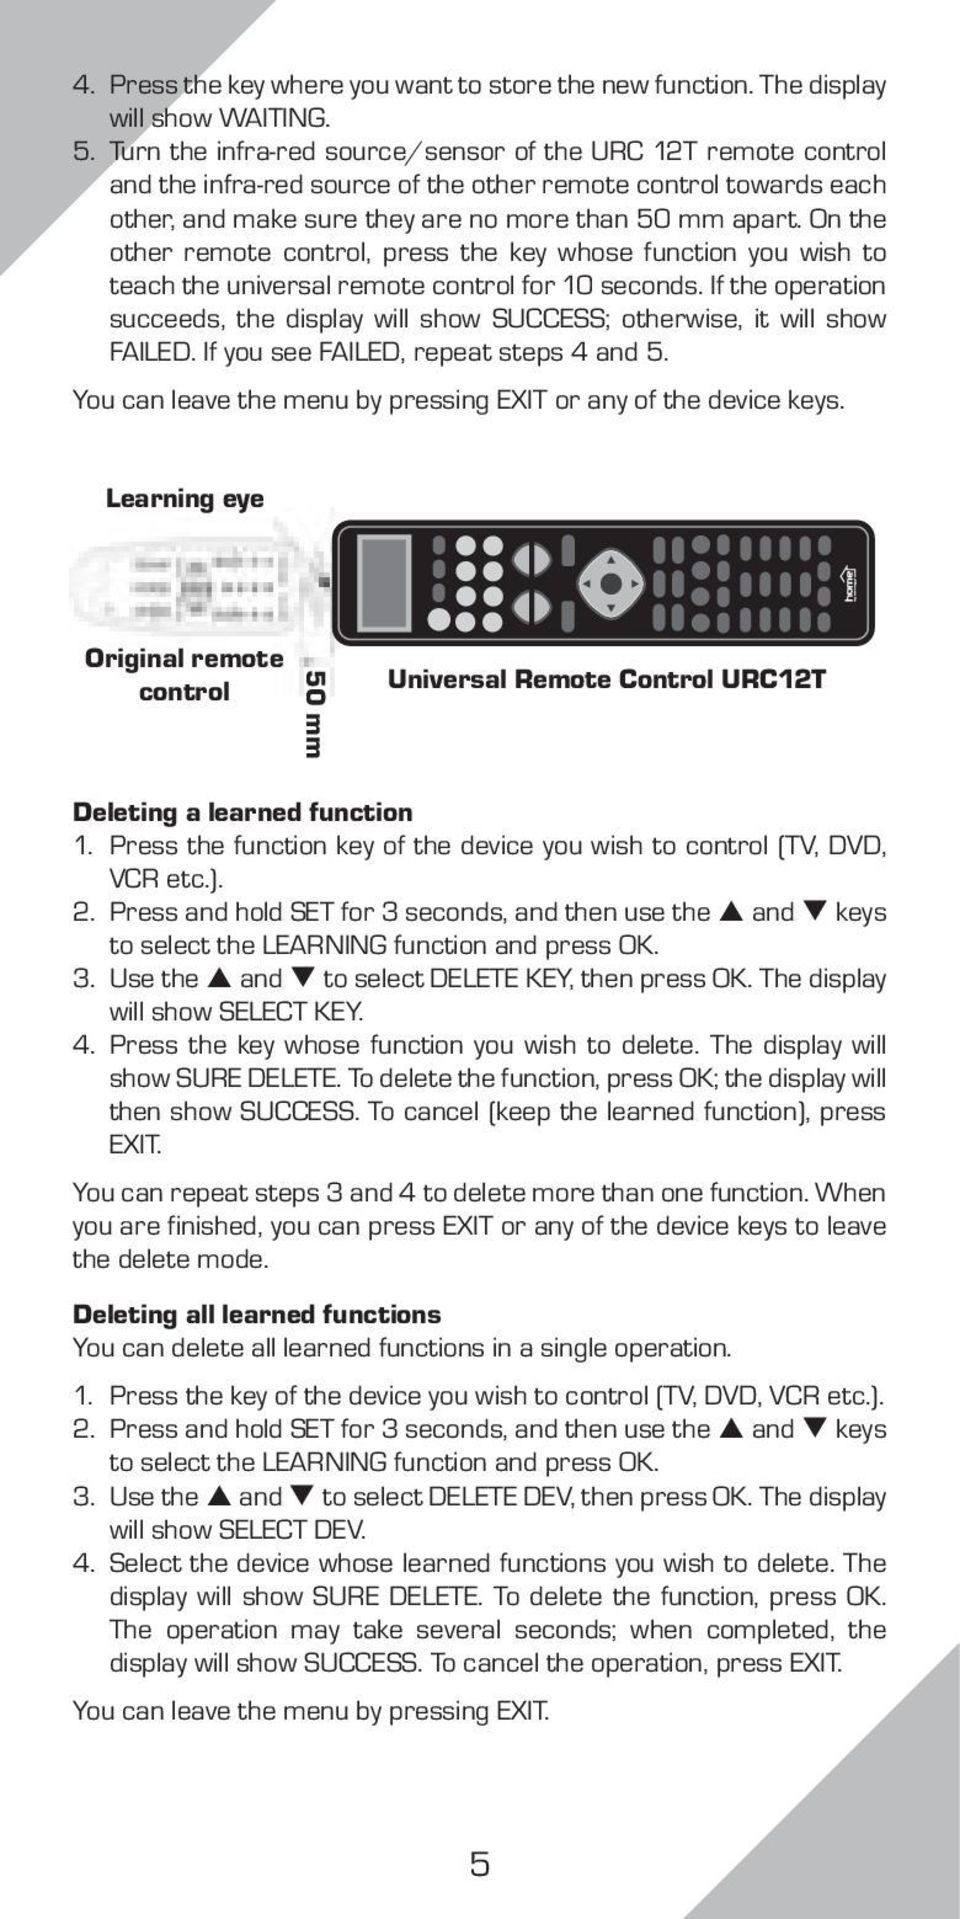 On the other remote control, press the key whose function you wish to teach the universal remote control for 10 seconds.